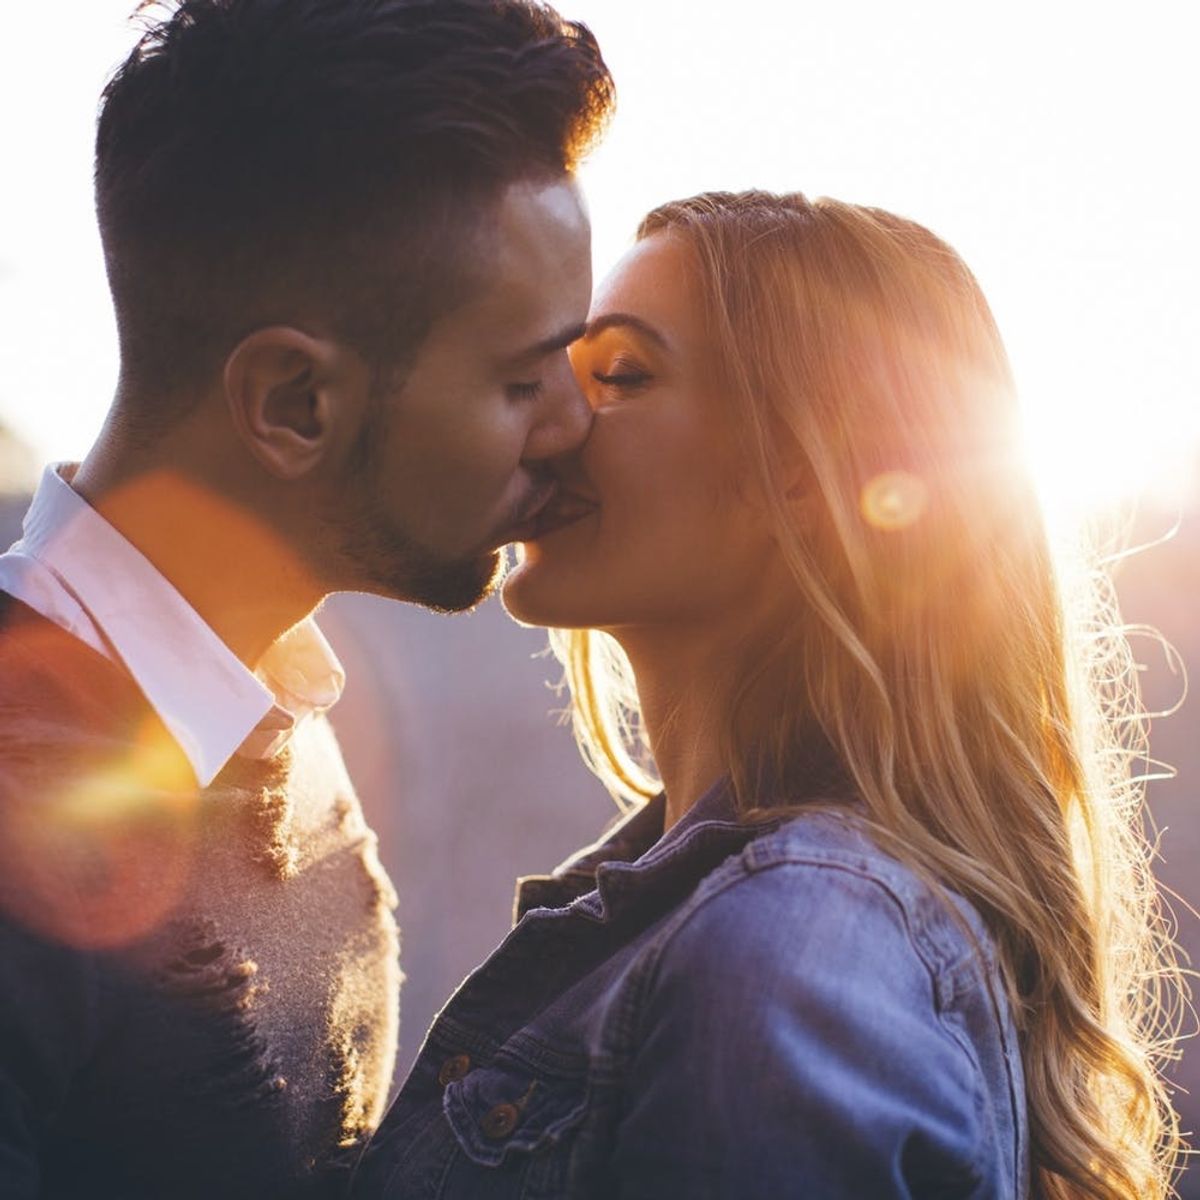 Kissing Is a Really Big Deal, According to Science